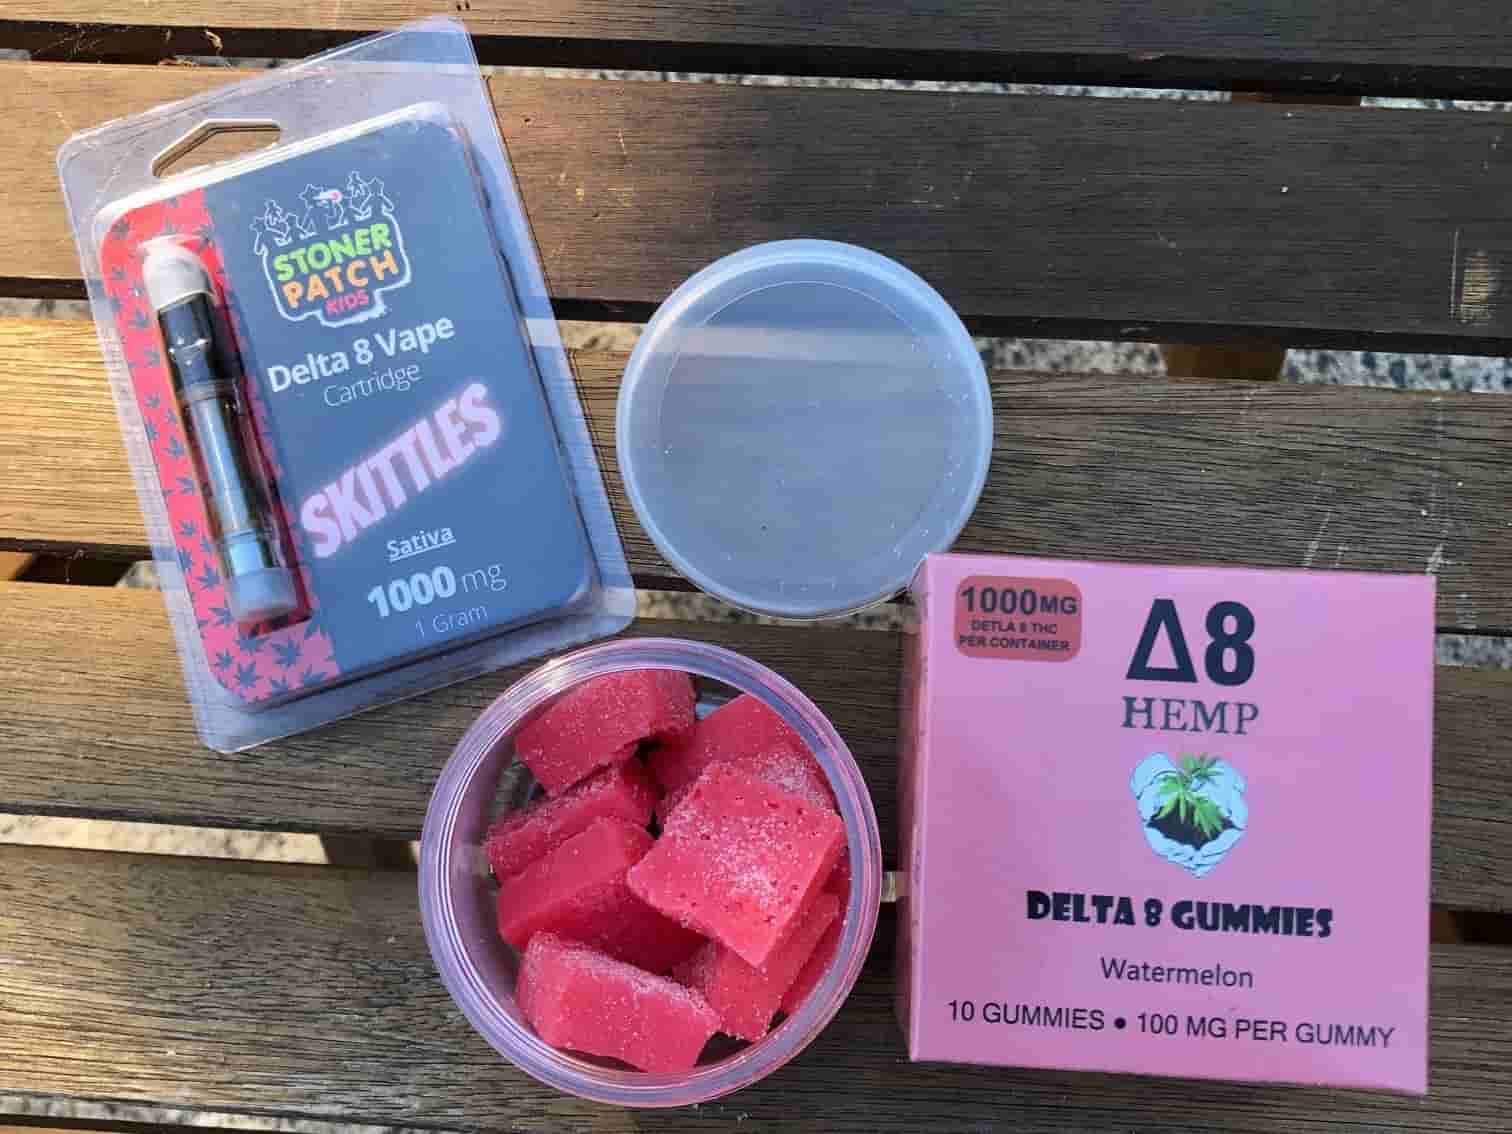 DELTA 8 VS DELTA 9 HIGH - Gummies|Thc|Products|Hemp|Product|Brand|Effects|Delta|Gummy|Cbd|Origin|Quality|Dosage|Delta-8|Dose|Usasource|Flavors|Brands|Ingredients|Range|Customers|Edibles|Cartridges|Reviews|Side|List|Health|Cannabis|Lab|Customer|Options|Benefits|Overviewproducts|Research|Time|Market|Drug|Farms|Party|People|Delta-8 Thc|Delta-8 Products|Delta-9 Thc|Delta-8 Gummies|Delta-8 Thc Products|Delta-8 Brands|Customer Reviews|Brand Overviewproducts|Drug Tests|Free Shipping|Similar Benefits|Vape Cartridges|Hemp Doctor|United States|Third Party Lab|Drug Test|Thc Edibles|Health Canada|Cannabis Plant|Side Effects|Organic Hemp|Diamond Cbd|Reaction Time|Legal Hemp|Psychoactive Effects|Psychoactive Properties|Third Party|Dry Eyes|Delta-8 Market|Tolerance Level